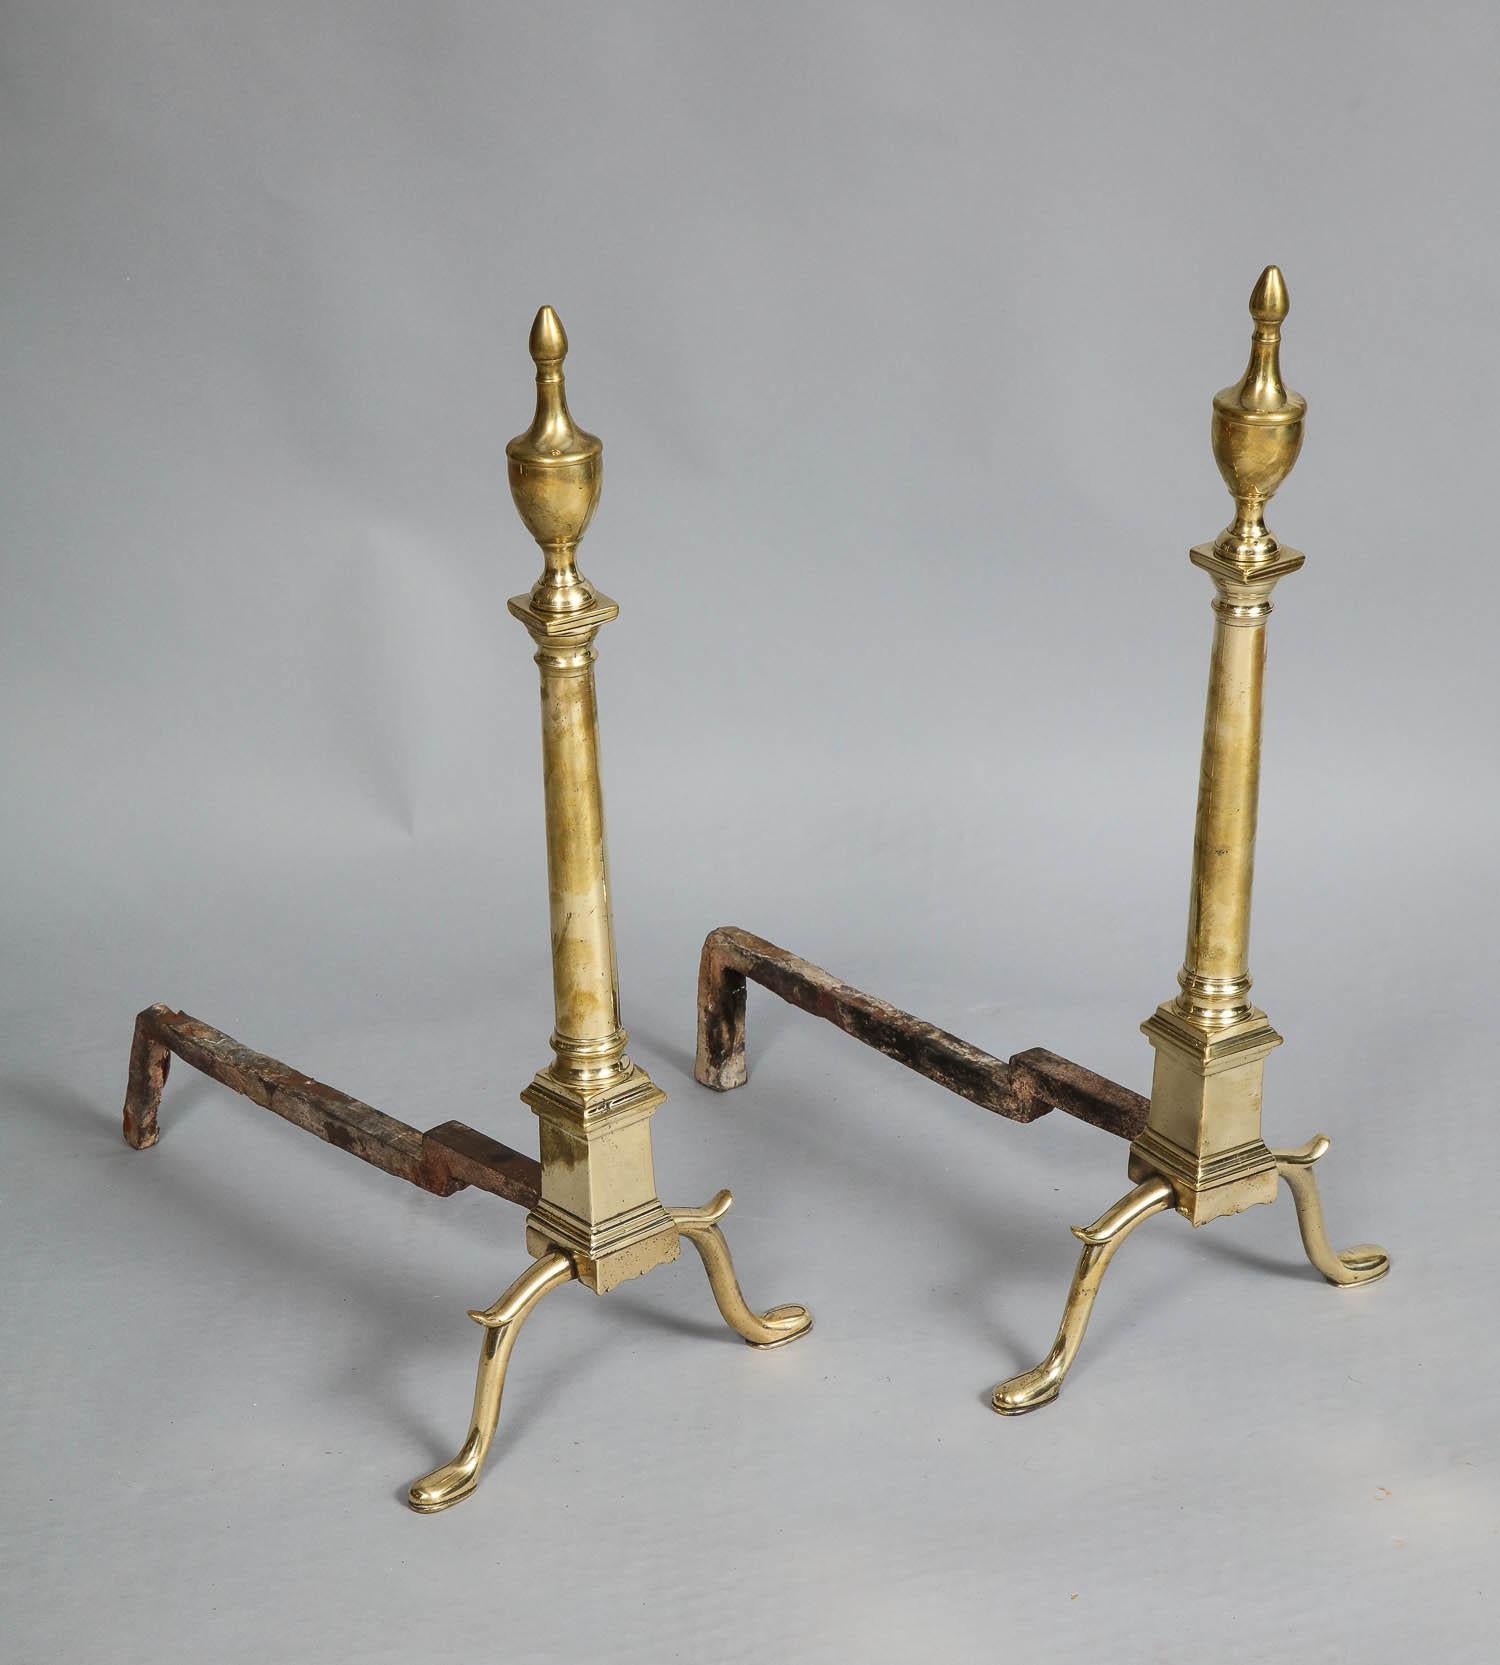 Fine pair of 18th century neoclassical brass andirons having urn finials over doric column shafts, standing on square plinth bases having cabriole legs with spurs over shoe feet.

Possibly Philadelphia, circa 1780.